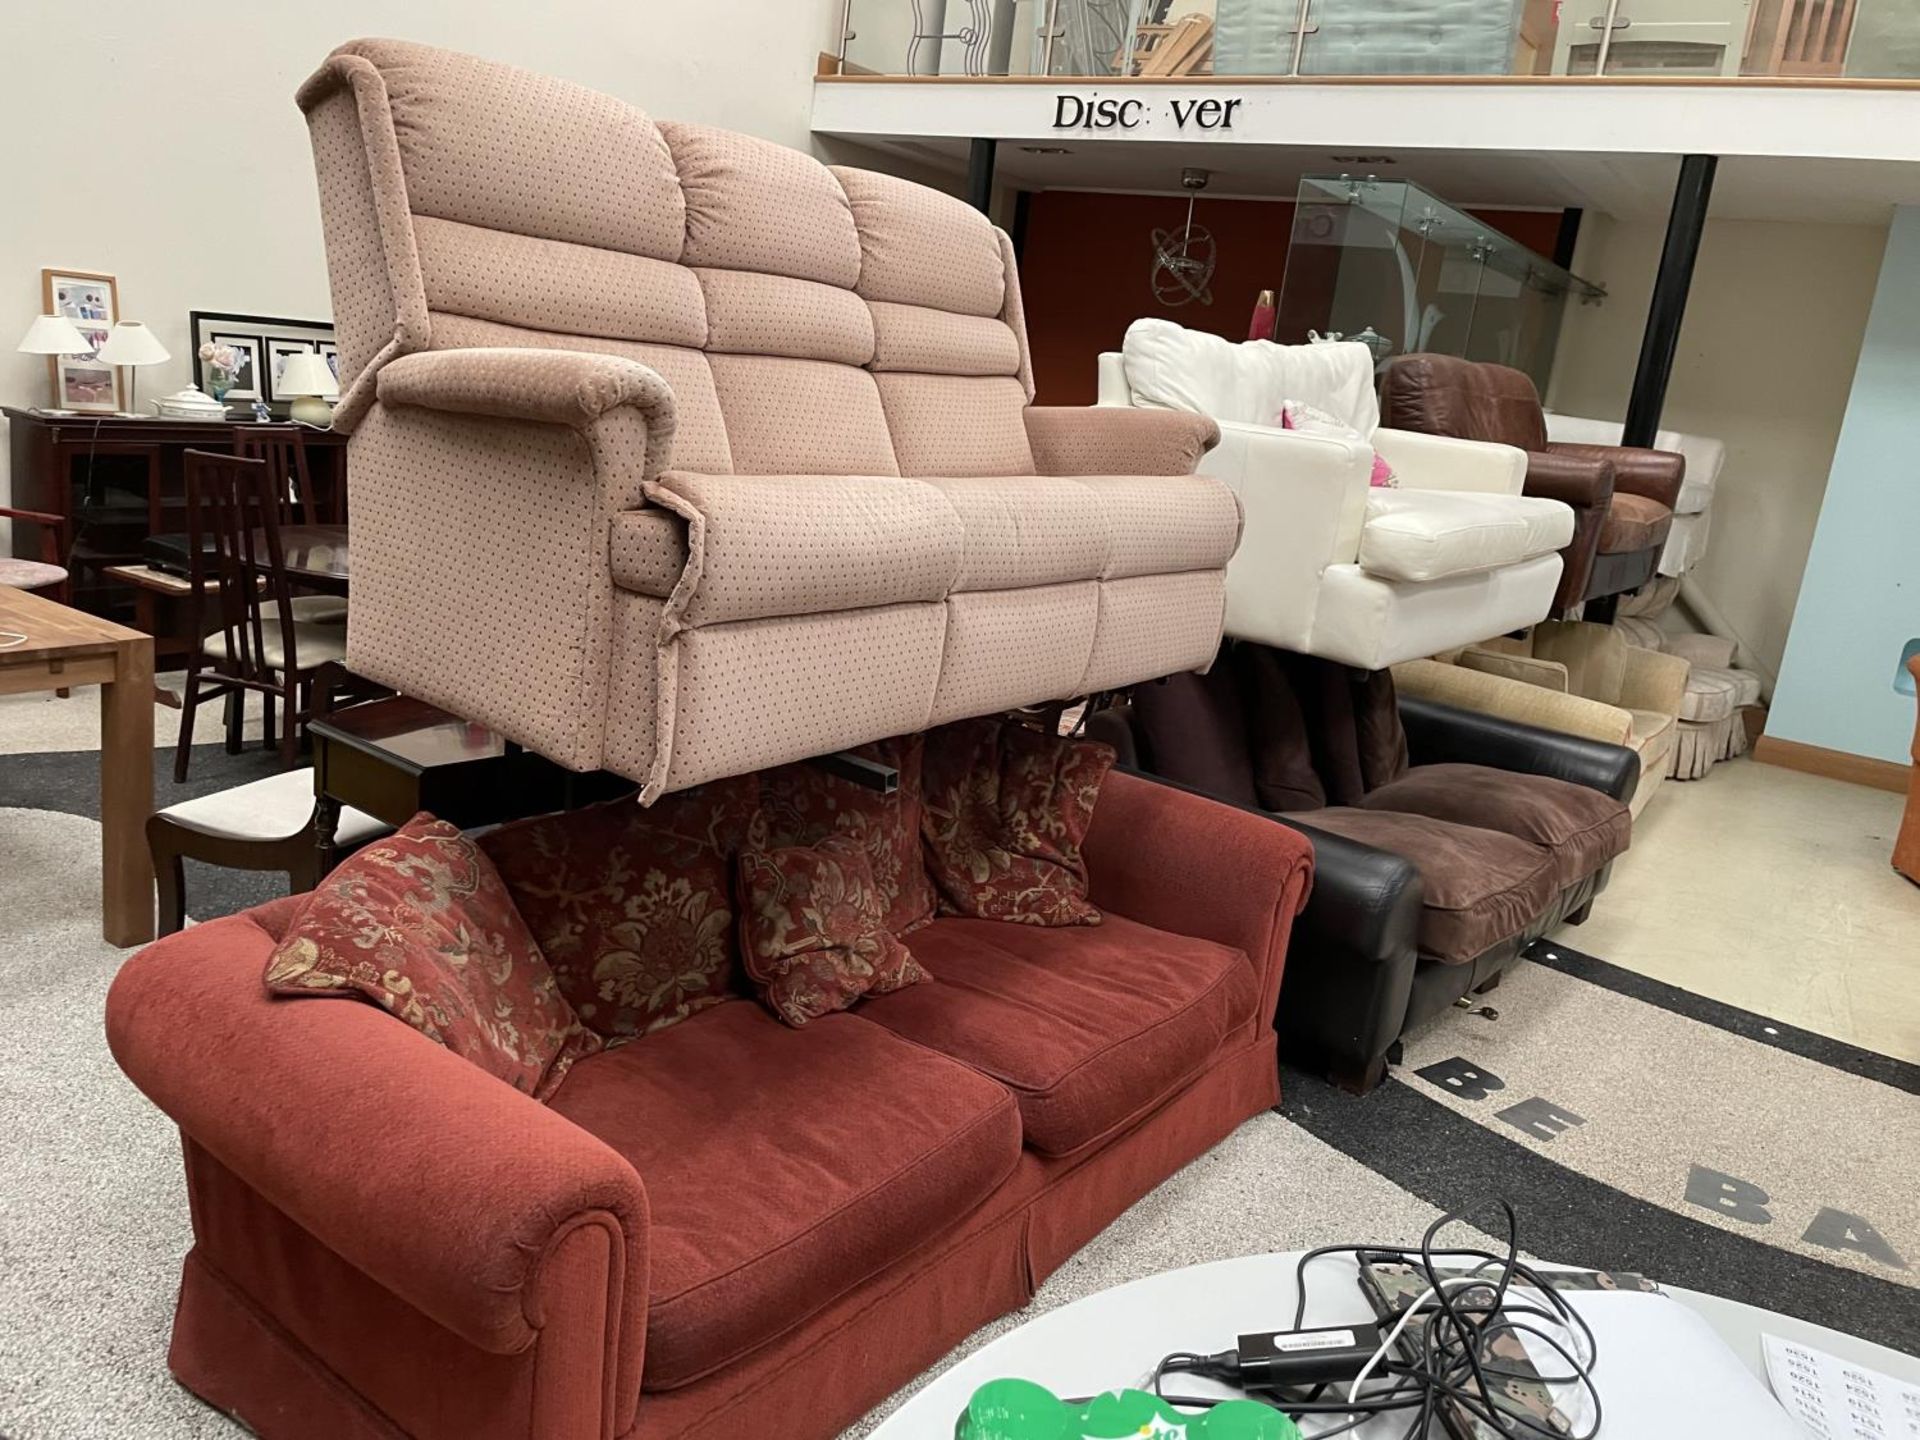 A GROUP OF EIGHT VARIOUS UPHOLSTERED AND LEATHER SOFAS. (ALL IN A GOOD CLEAN CONDITION) THIS ITEMS